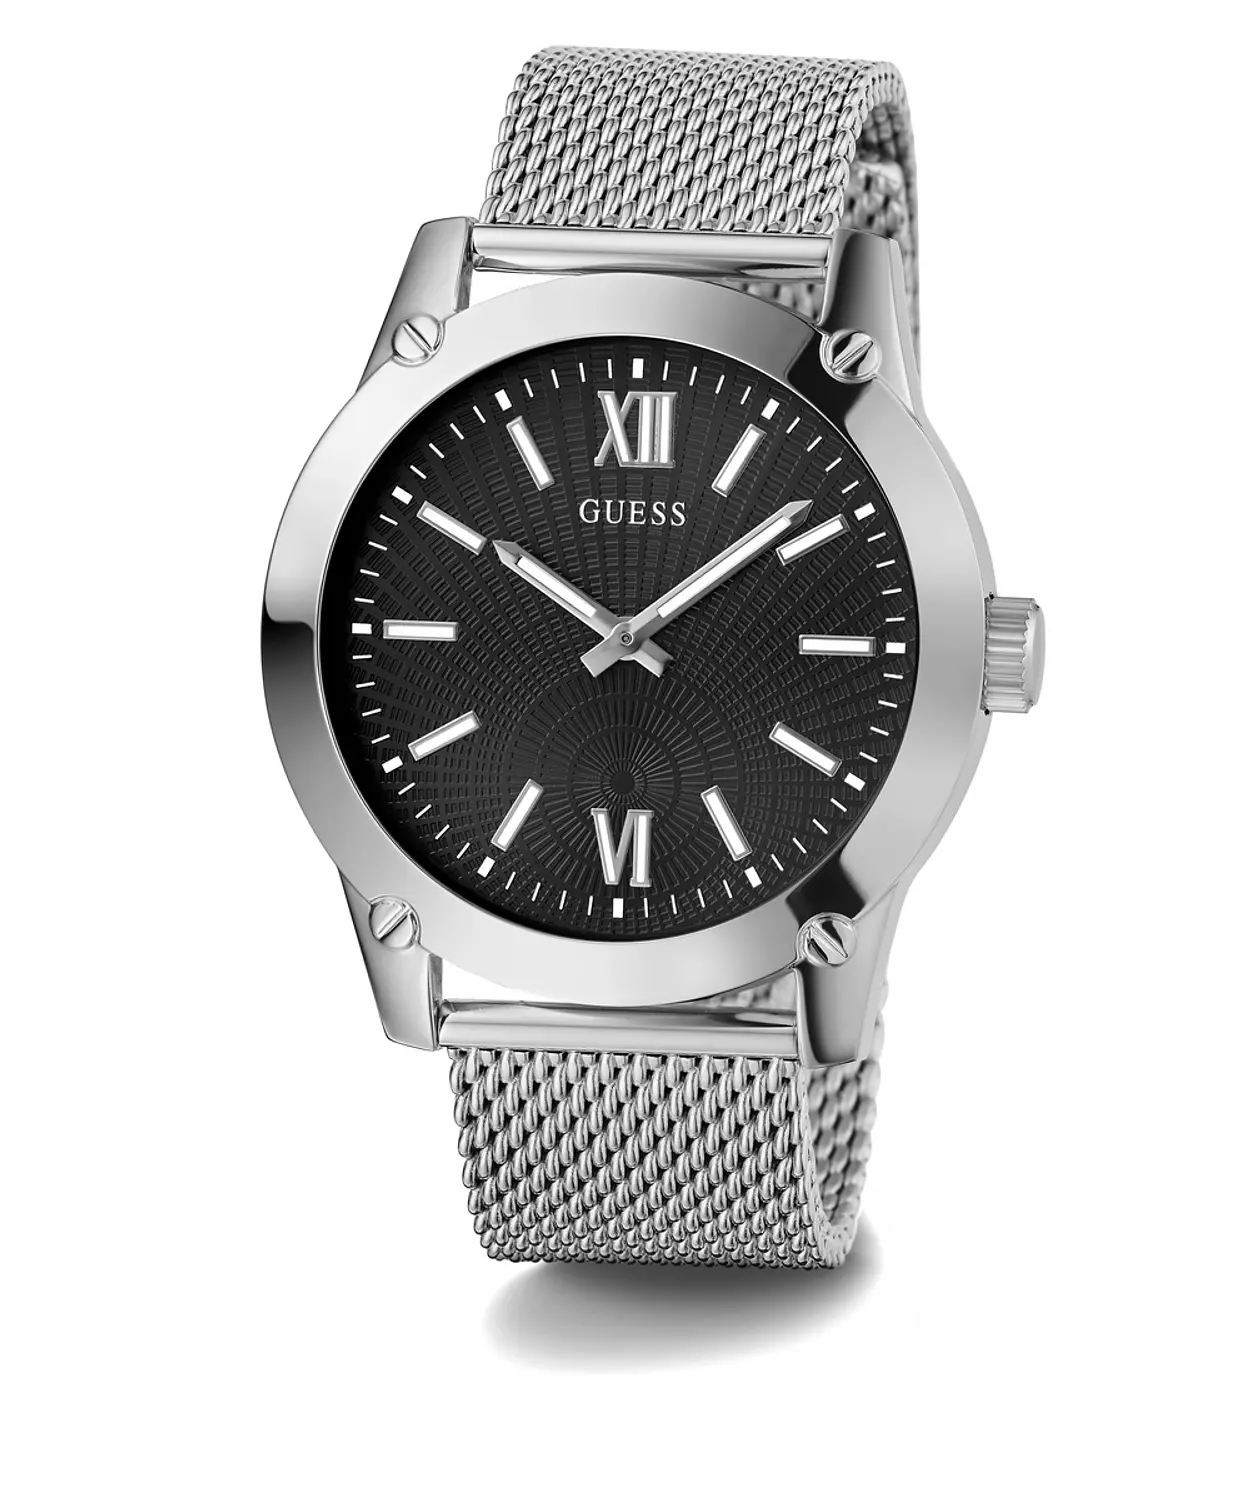 GUESS GW0629G1 ANALOG WATCH  For Men Silver Stainless Steel/Mesh Polished Bracelet  3